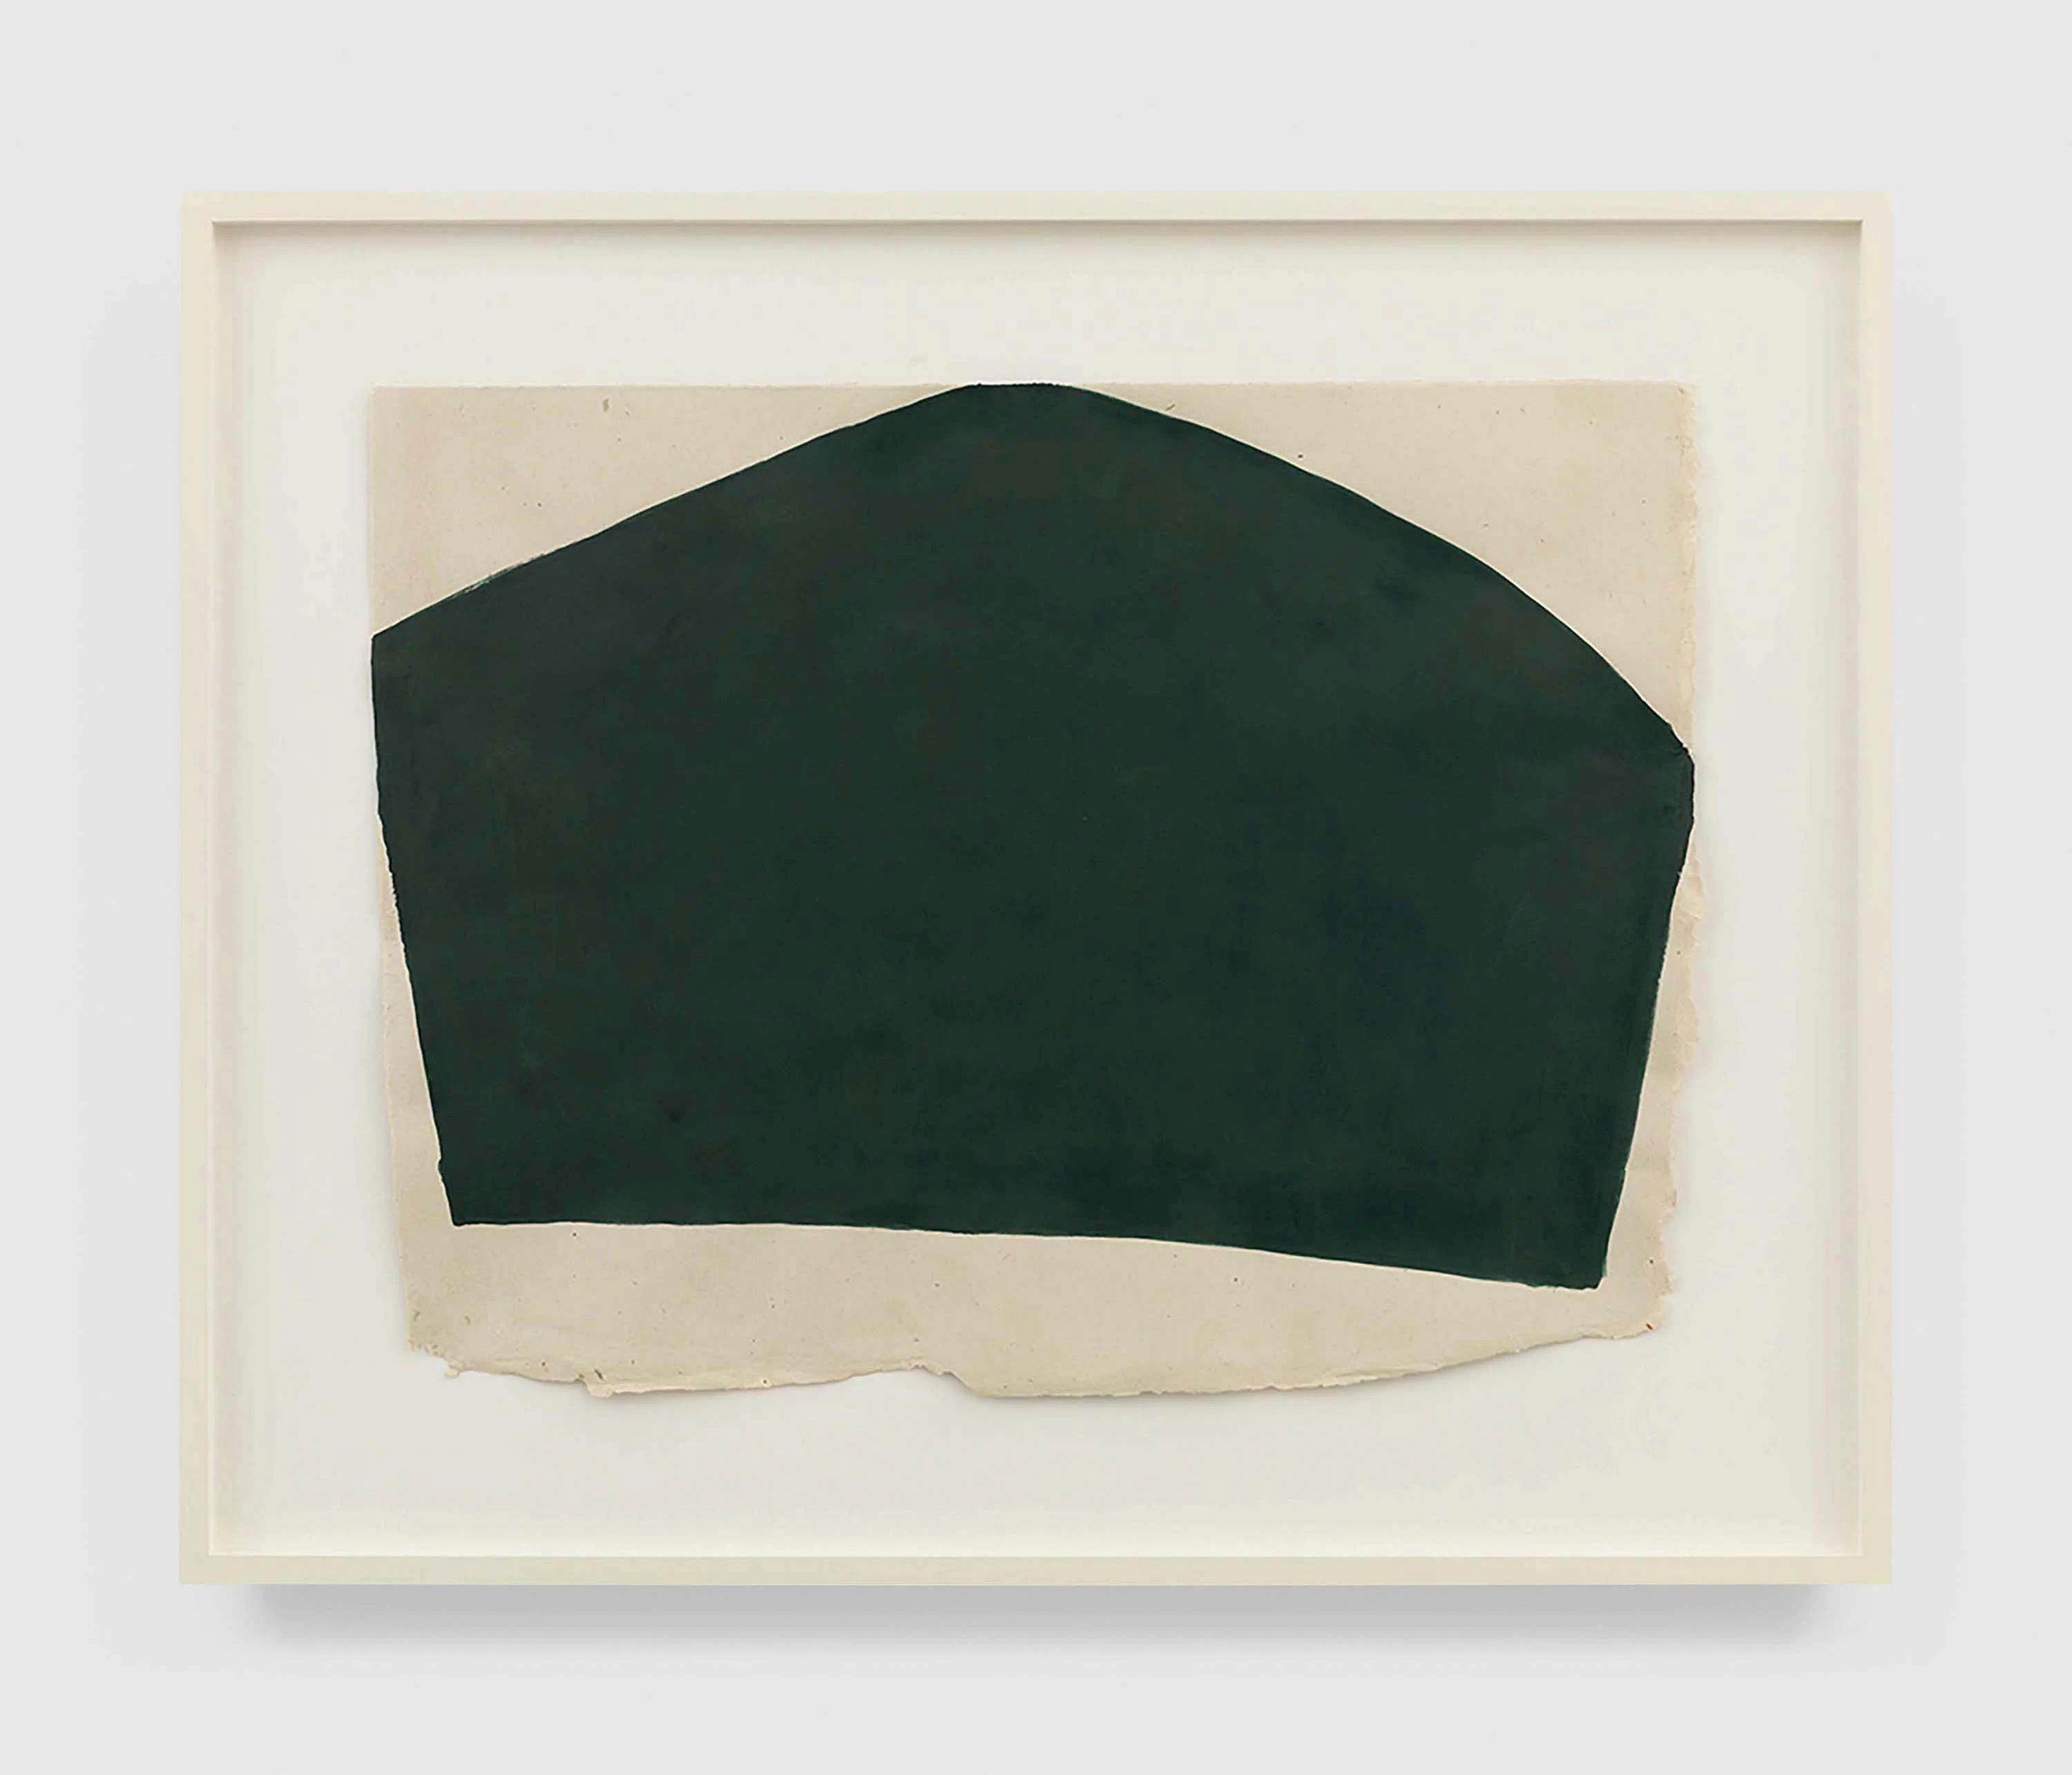 A work on paper by Suzan Frecon title lifted dark green composition touching top and two sides, dated 2013.